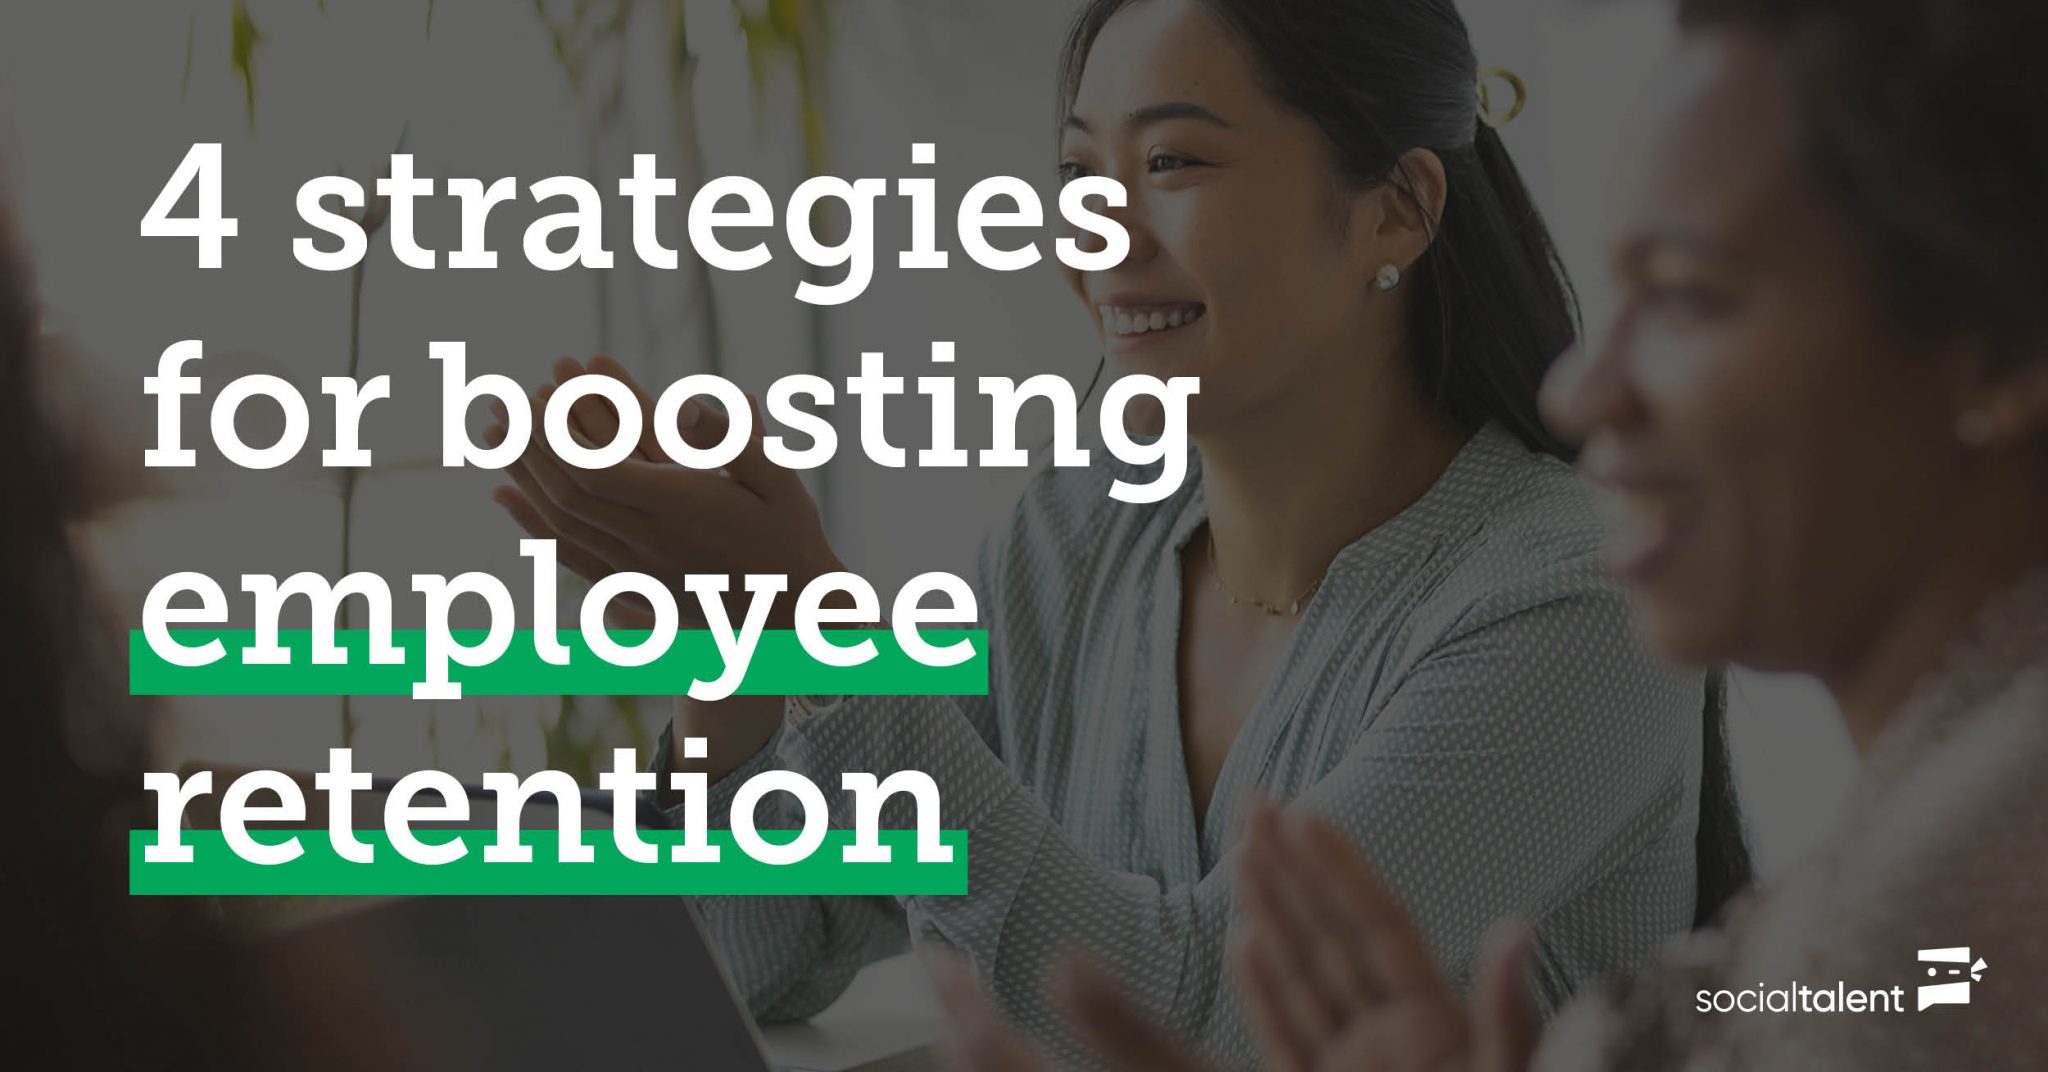 4 strategies for boosting employee retention